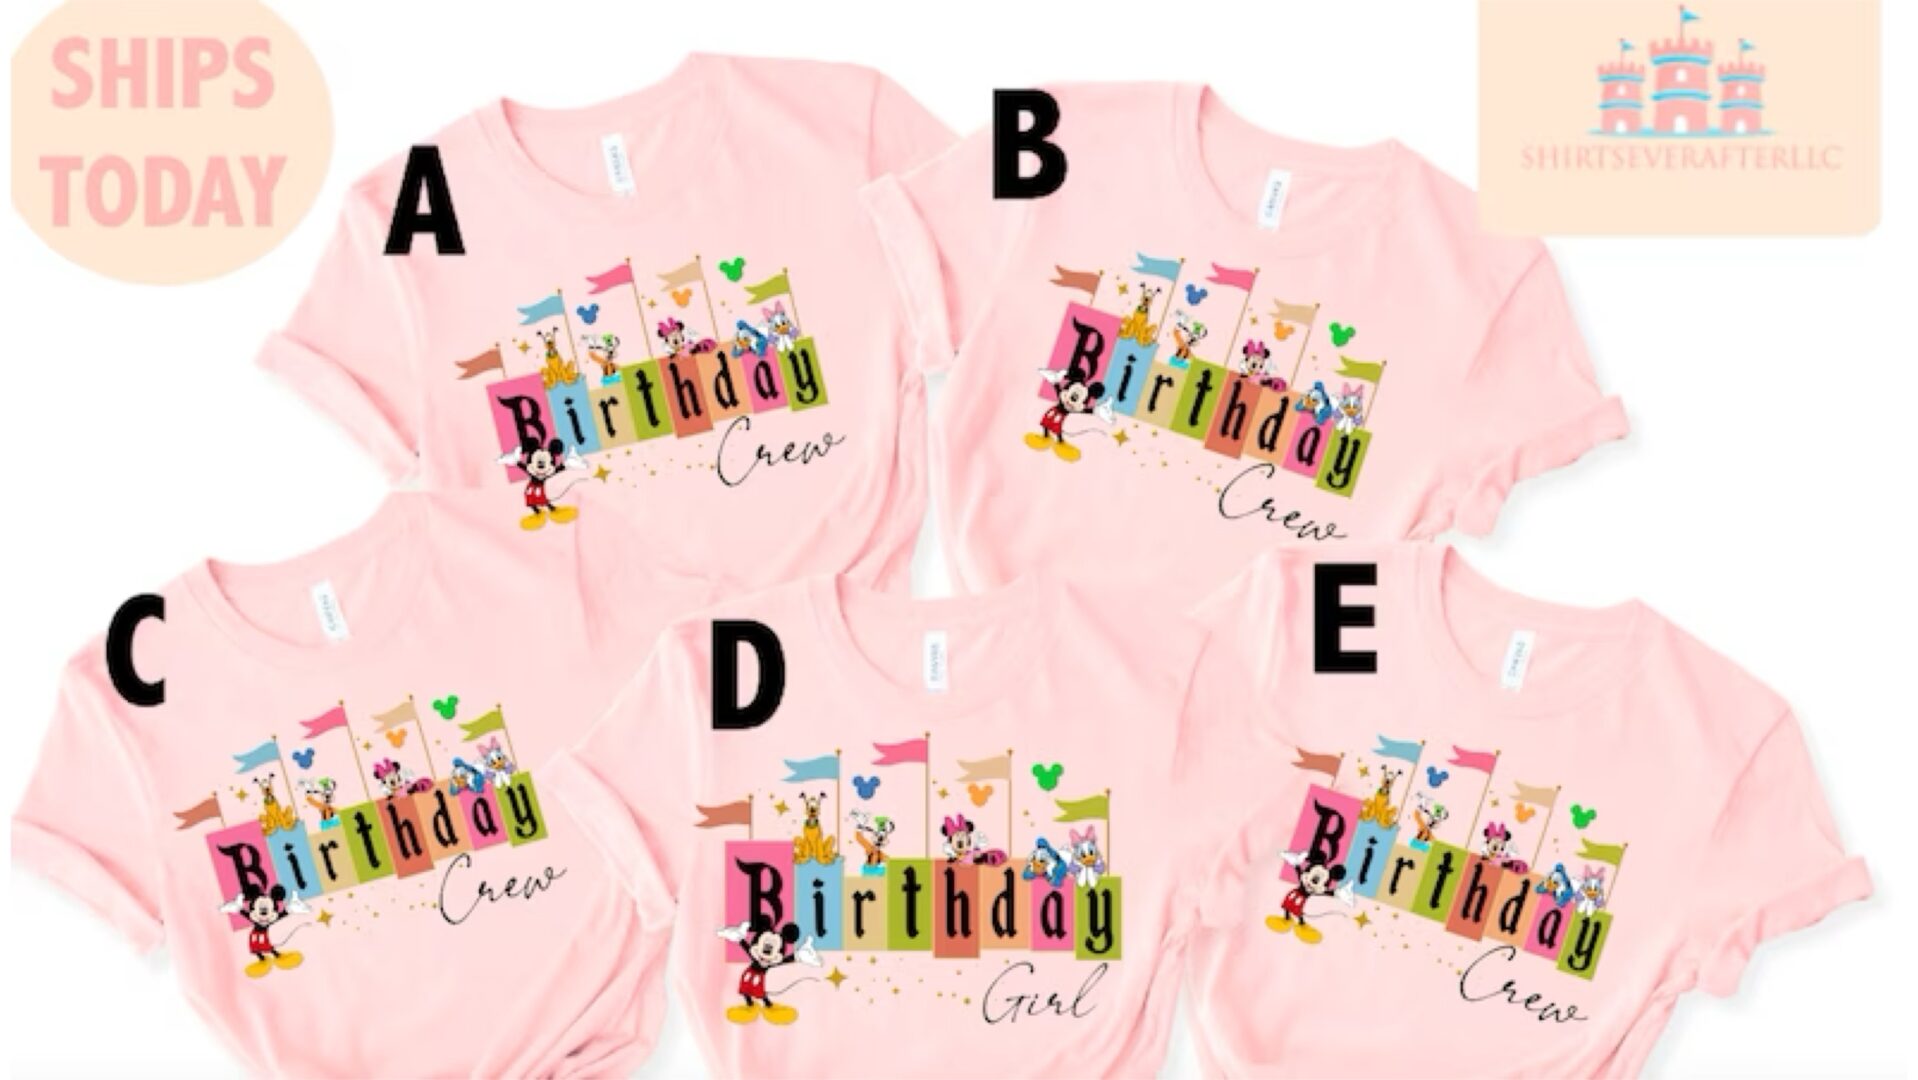 Magical Disney Birthday Shirt To Celebrate Your Special Day!